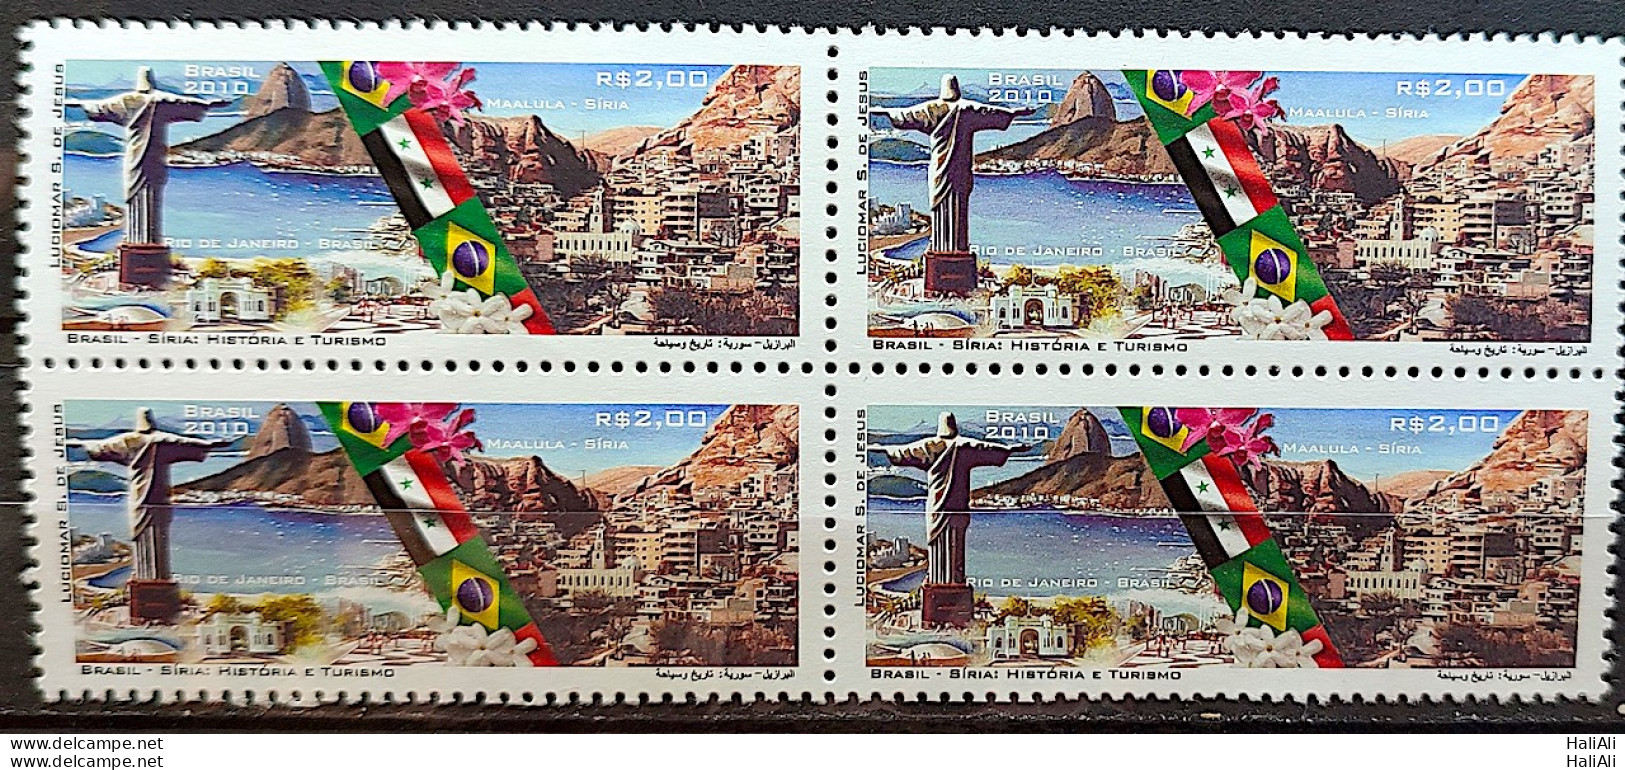 C 2983 Brazil Stamp Diplomatic Relations Syria Christ The Redeemer RJ Flag 2010 Block Of 4 - Unused Stamps